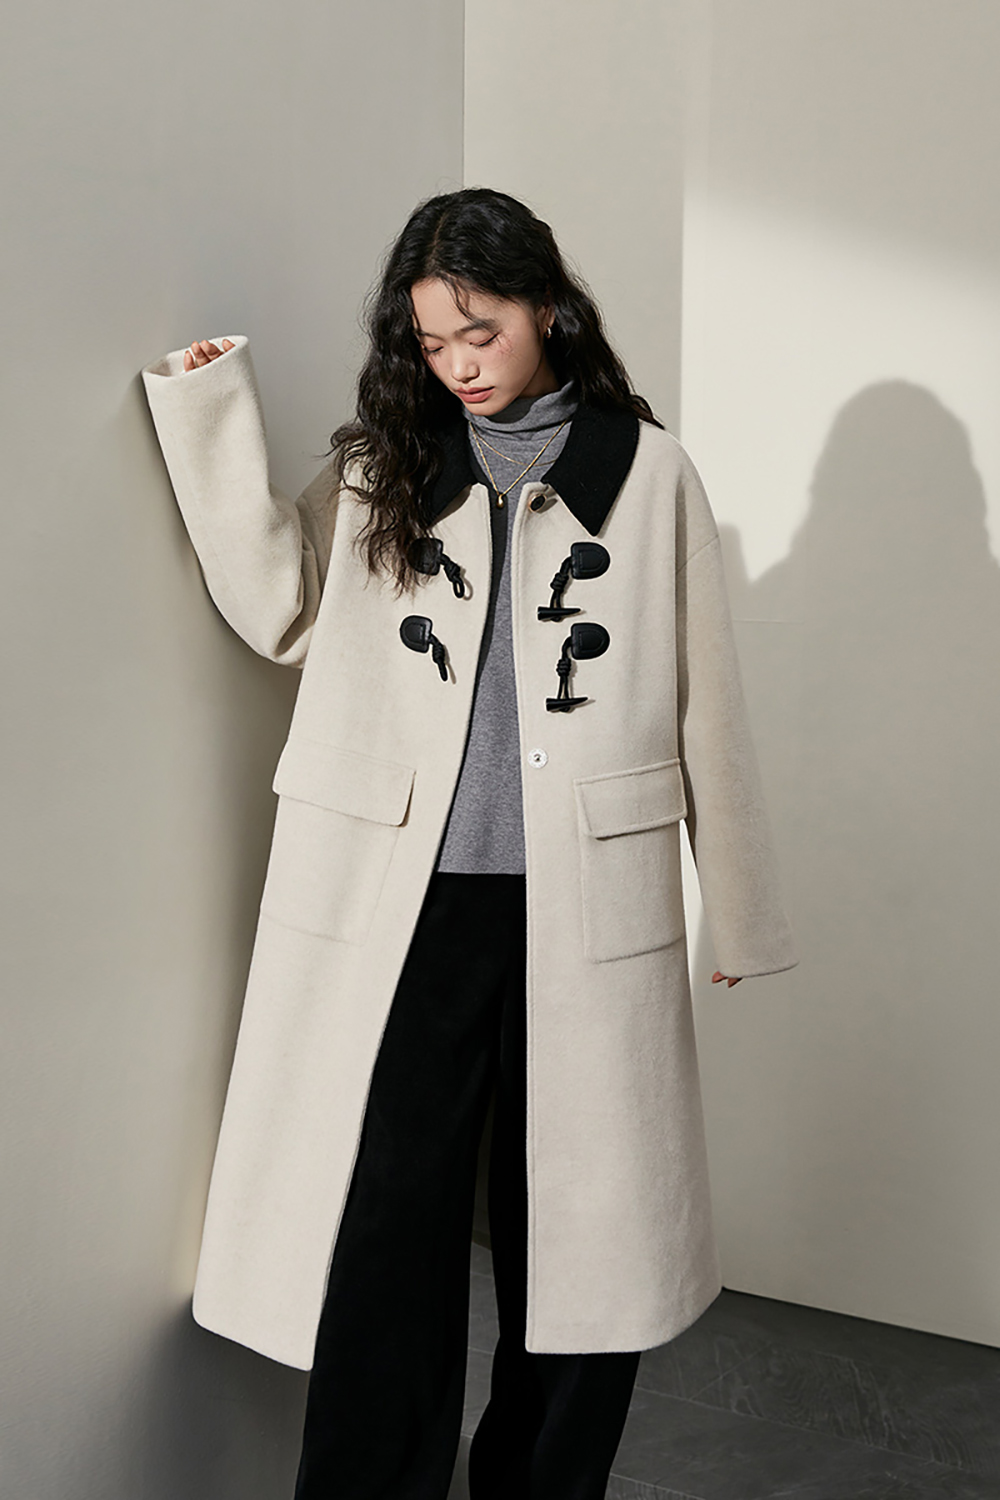 Horn buttons woolen coat for women in winter 2022 new style color contrast lapel Medium to Large size of woolen coat